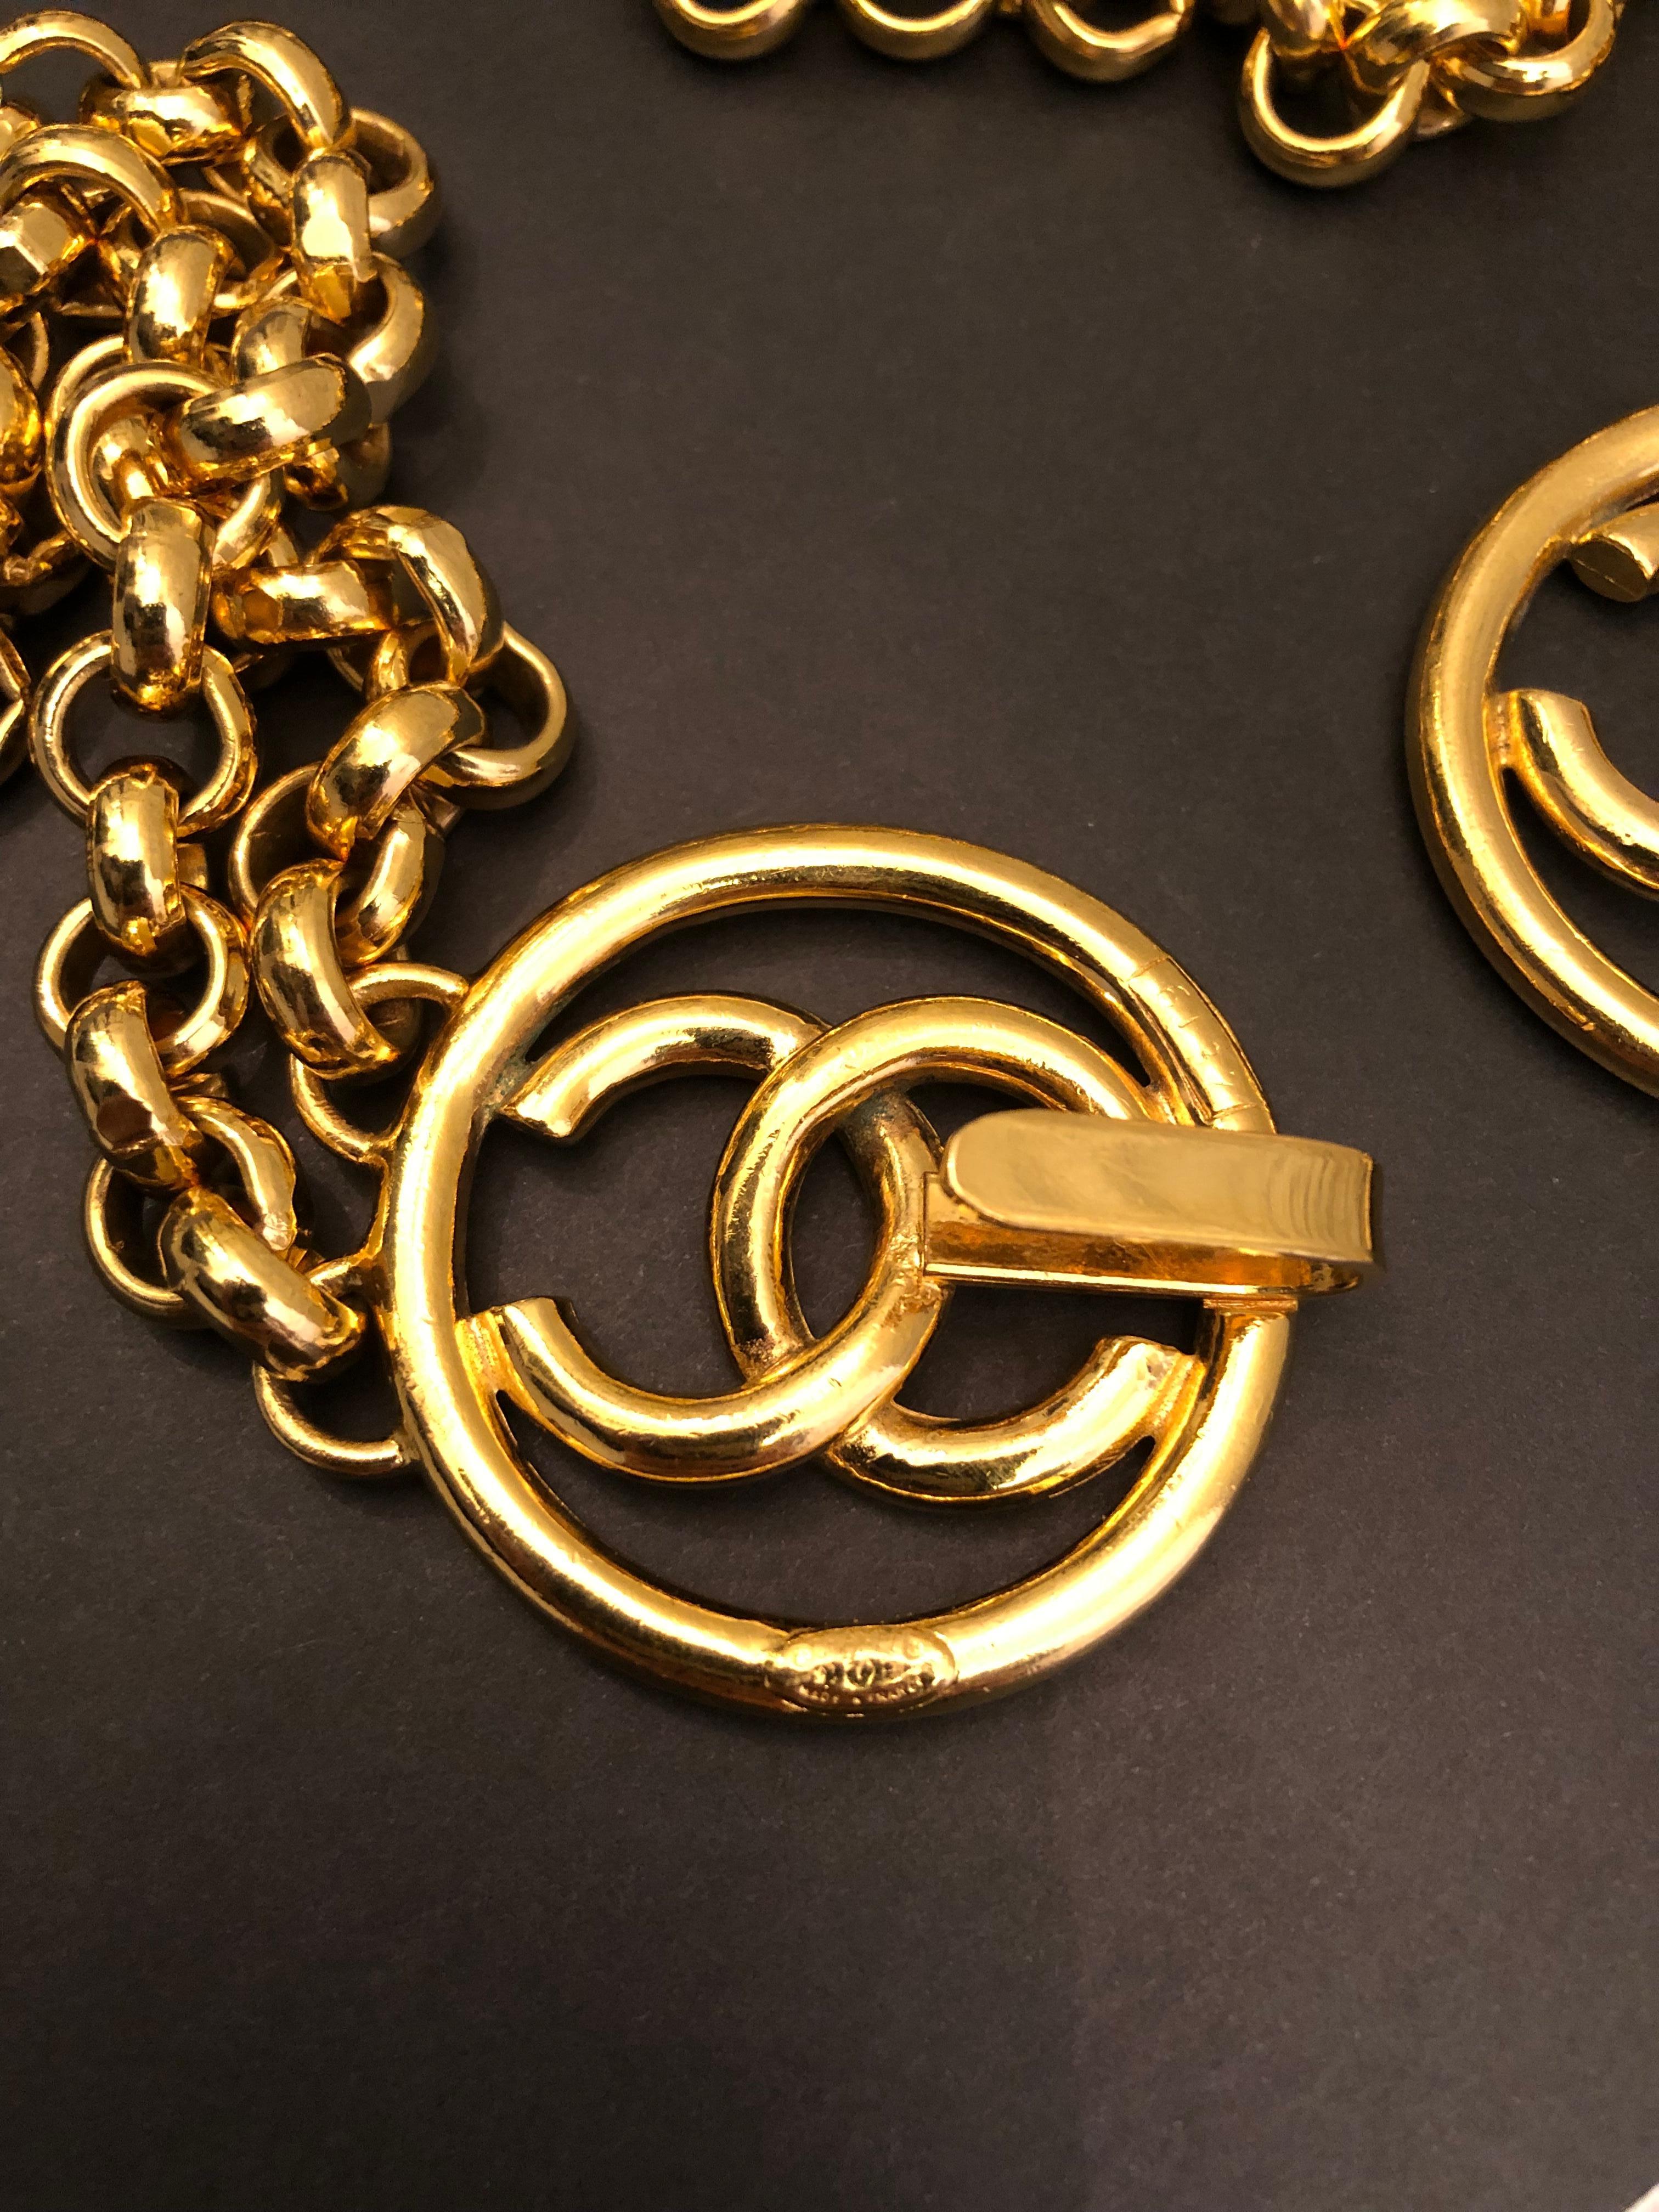 1993 Vintage CHANEL Gold Toned Clover CC Chain Belt 42 Inches Long For Sale 3